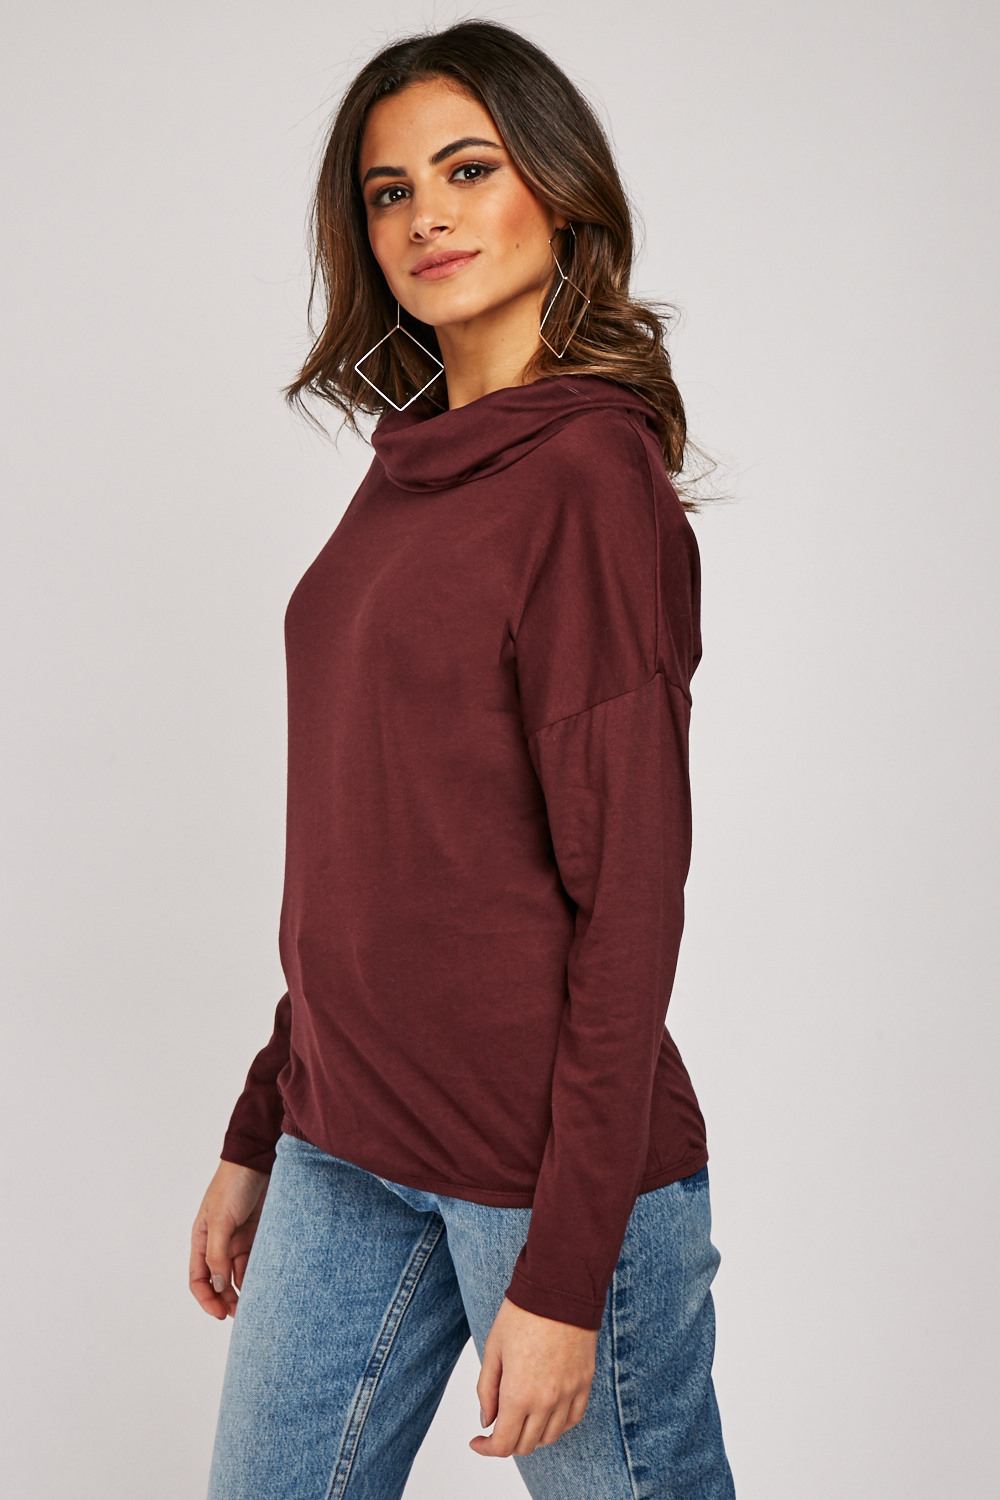 Slouchy Neck Plain Top - Just $7